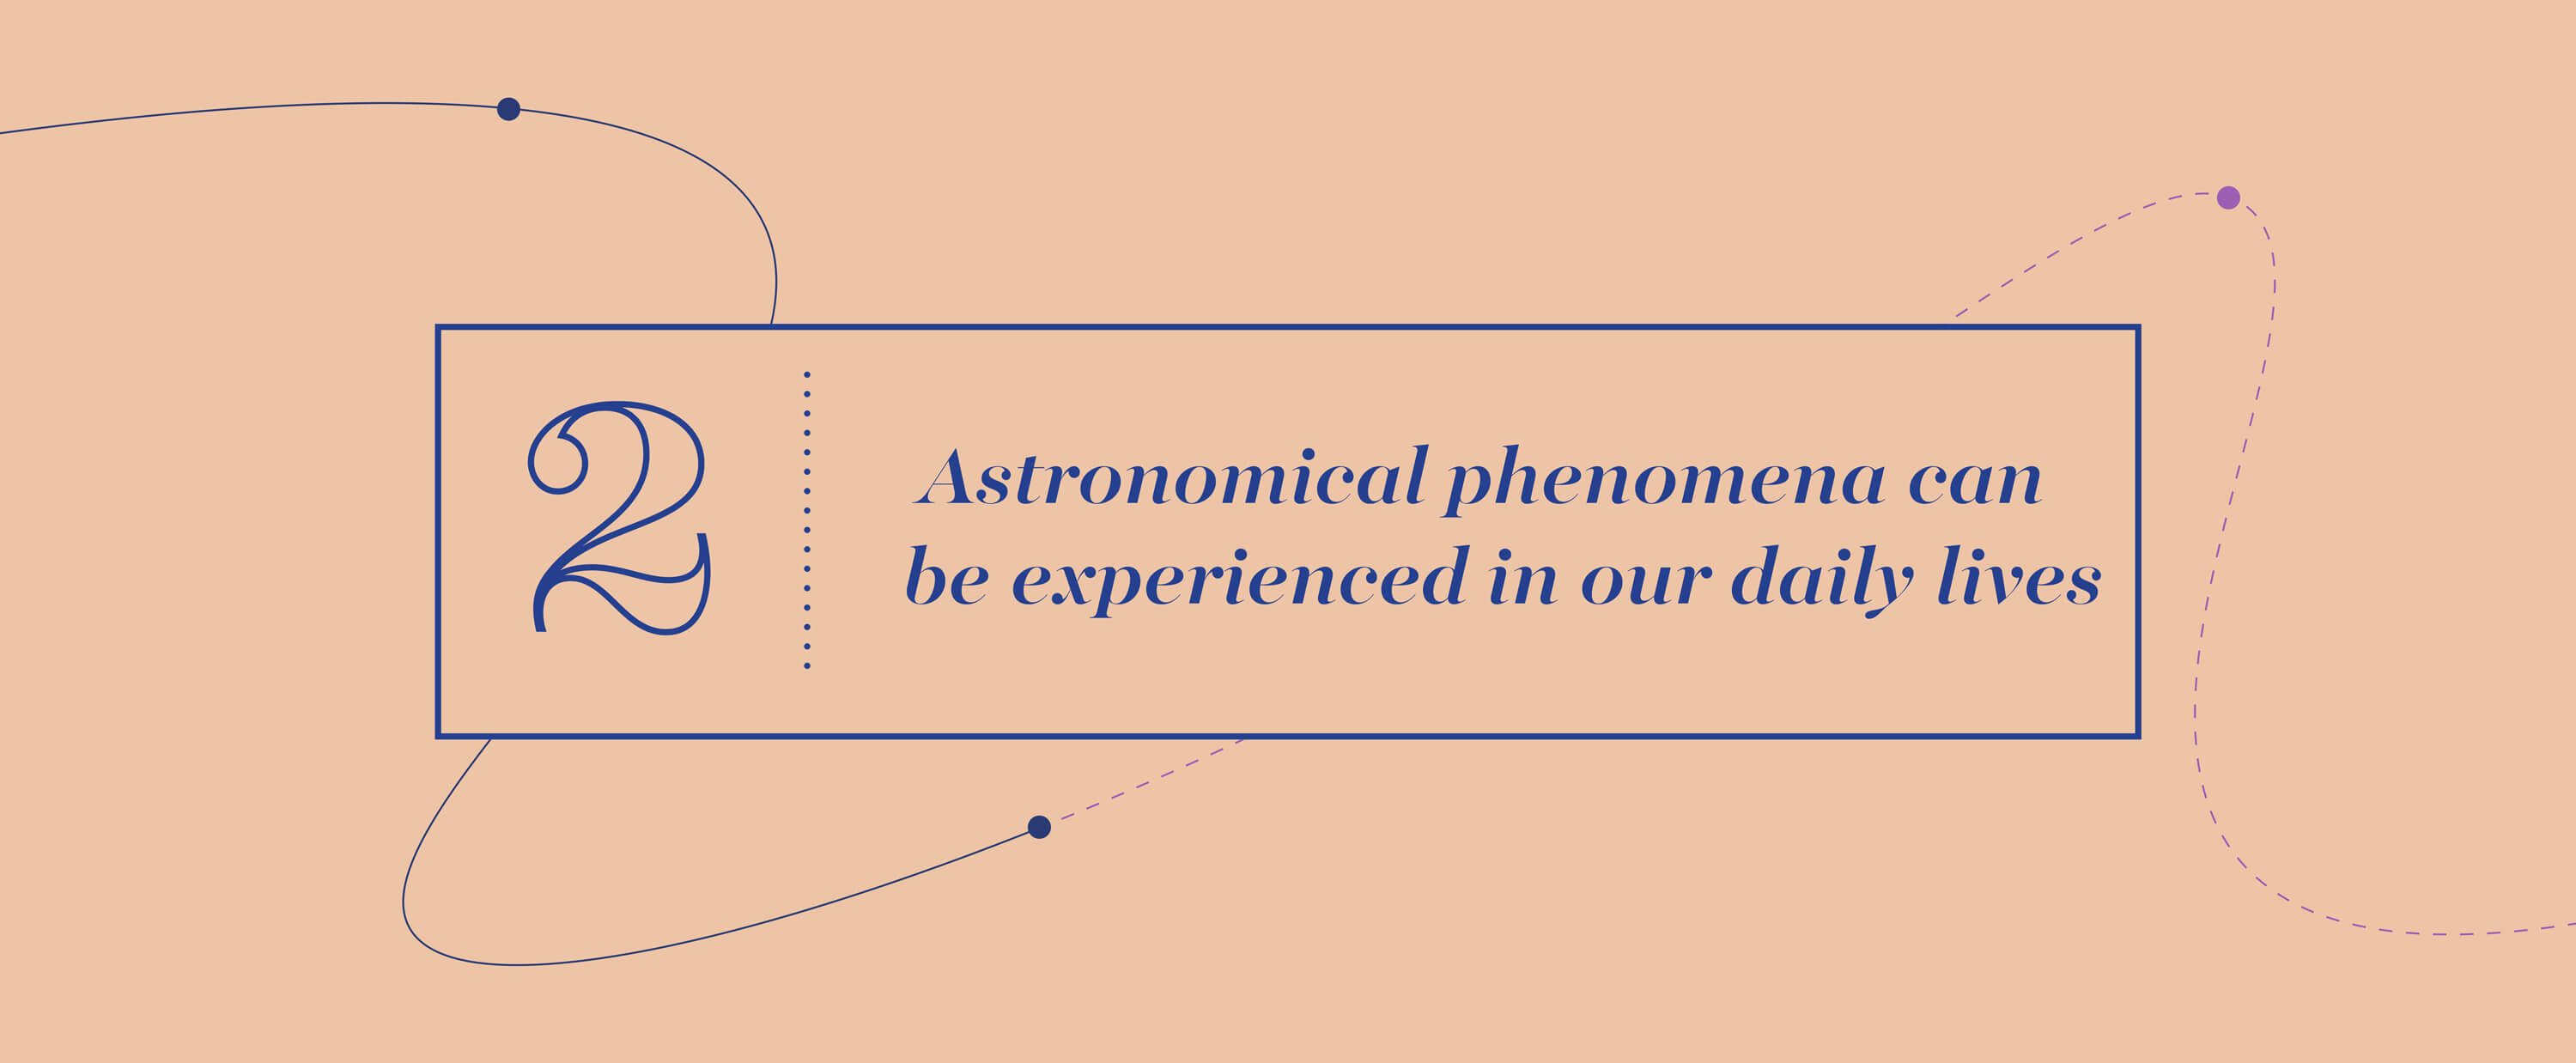 Big Idea 2 - Astronomical phenomena can be experienced in our daily lives